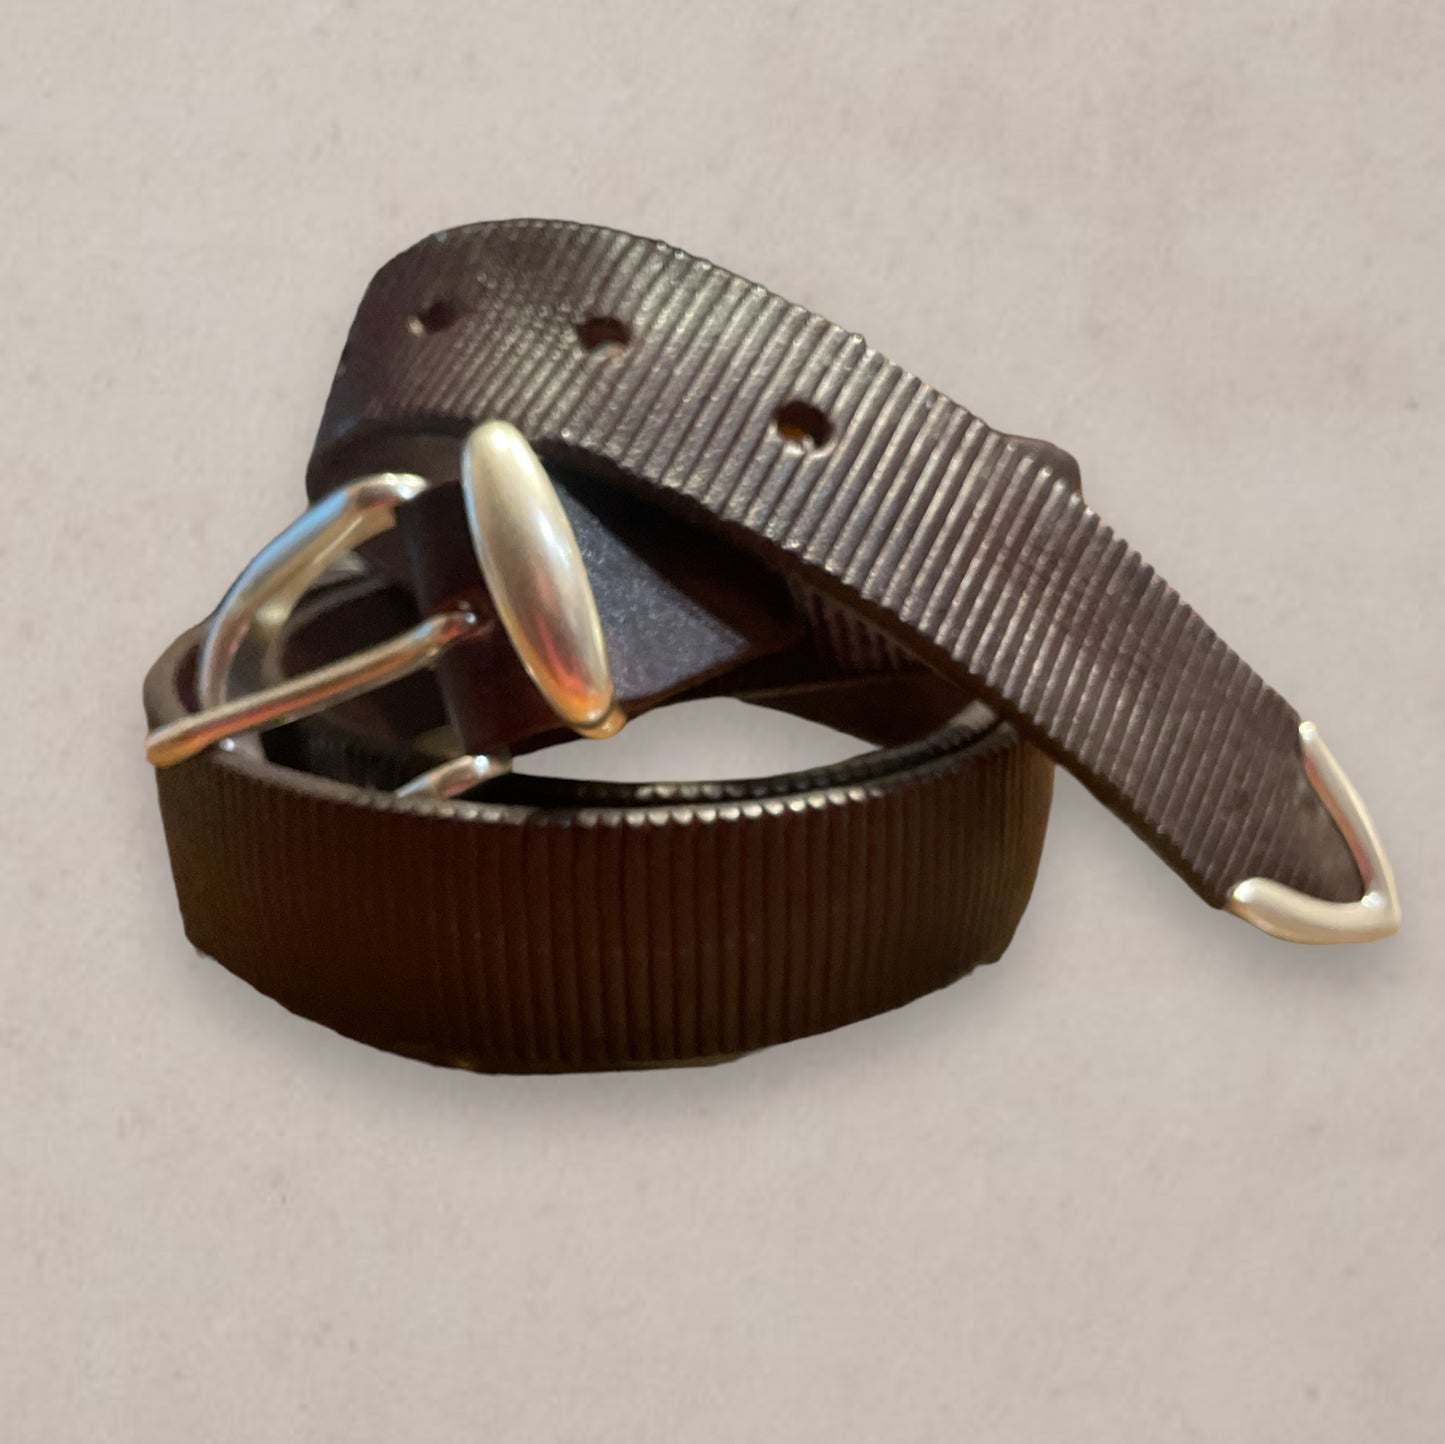 Striped Leather Belt With Metal Finished Toe